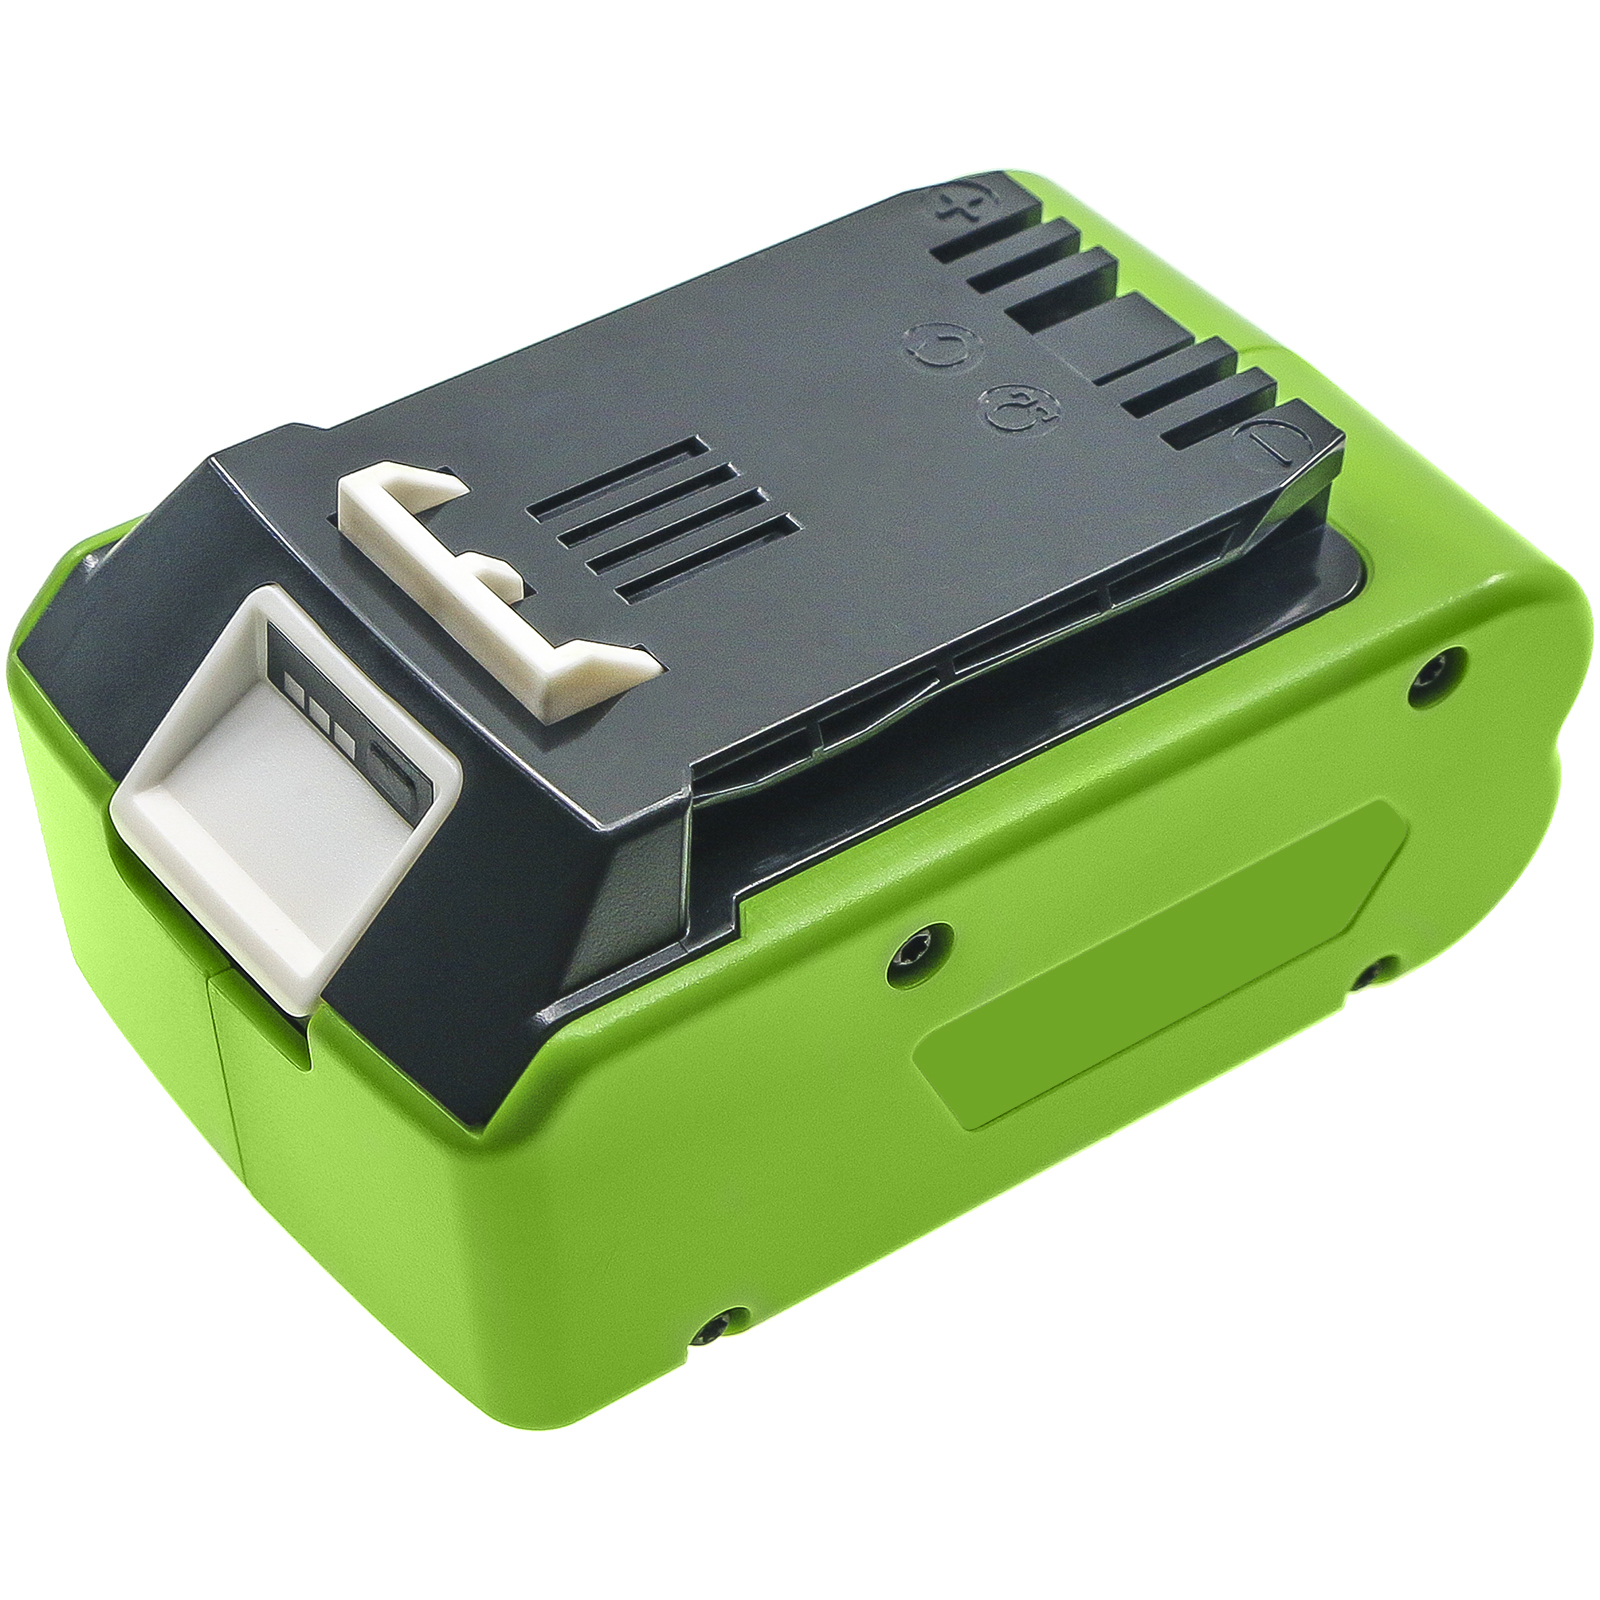 Synergy Digital Power Tool Battery, Compatible with GreenWorks G24B2 Power Tool Battery (Li-ion, 24V, 4000mAh)